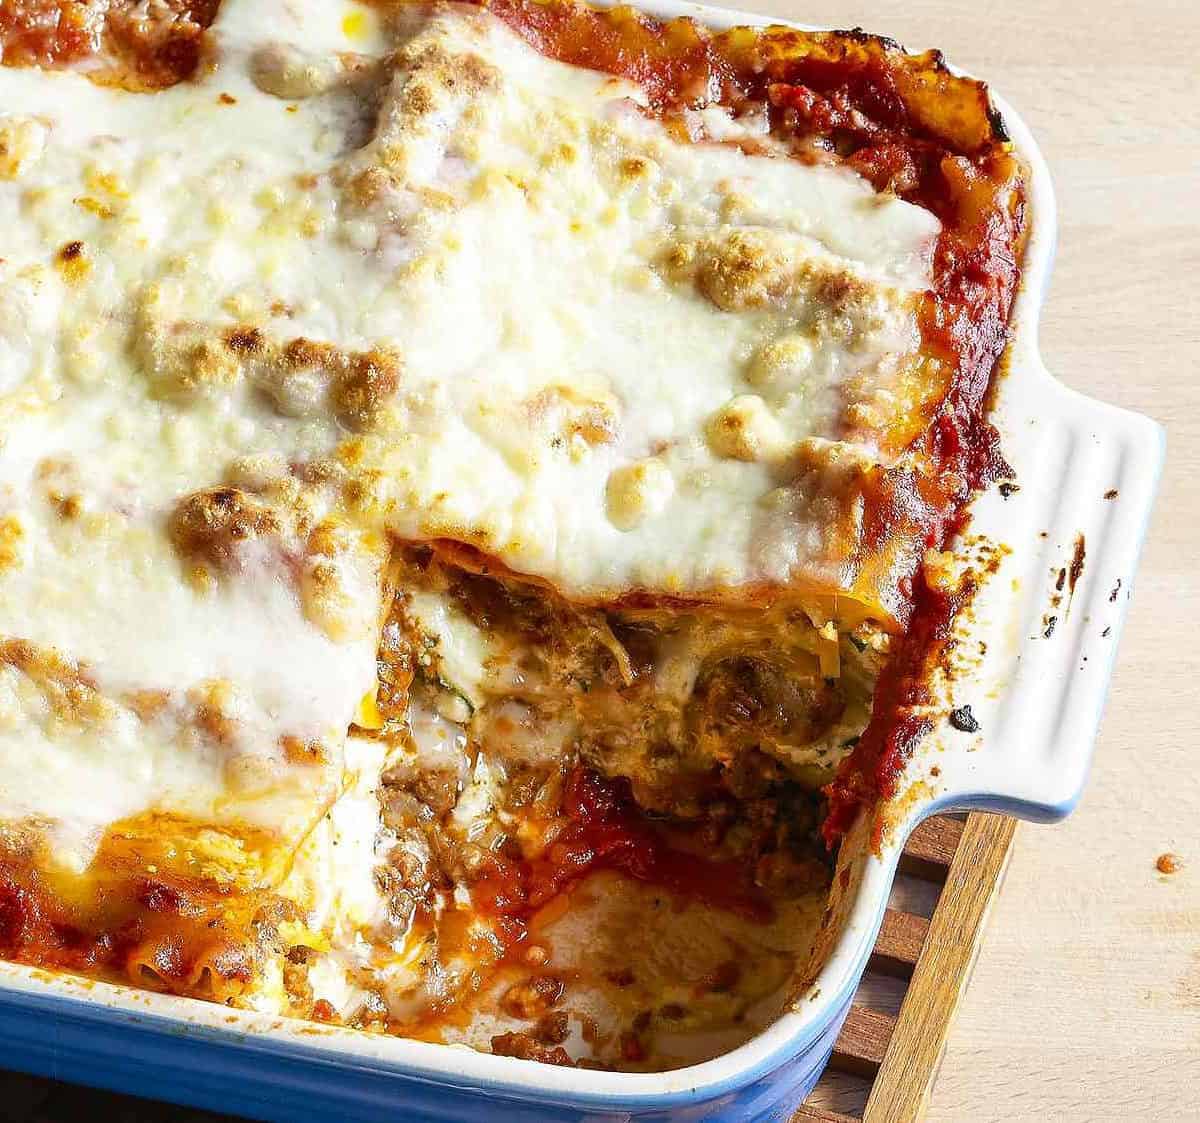  Classic Italian flavors that come together in every forkful of this lasagna.